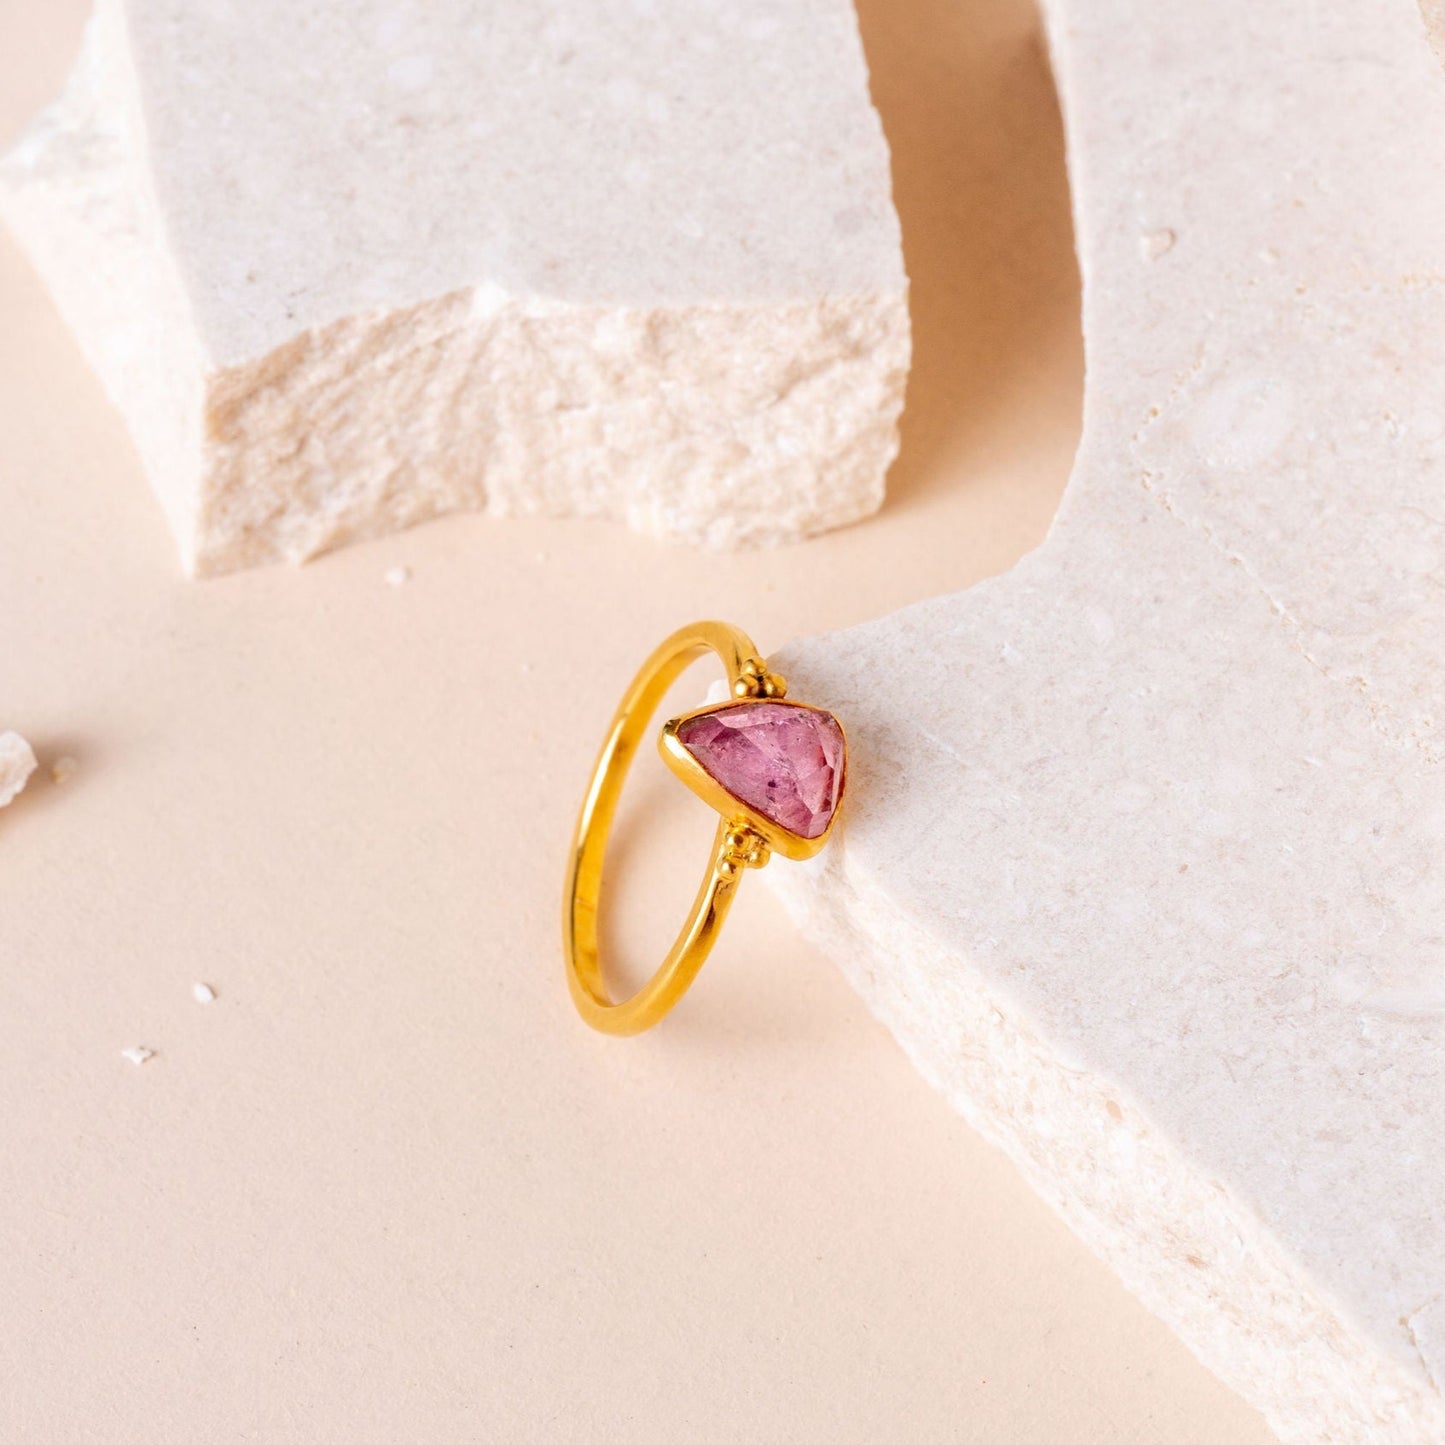 Elegant gold ring featuring a lovely pink tourmaline gem, crafted with precision and unique granulation details.